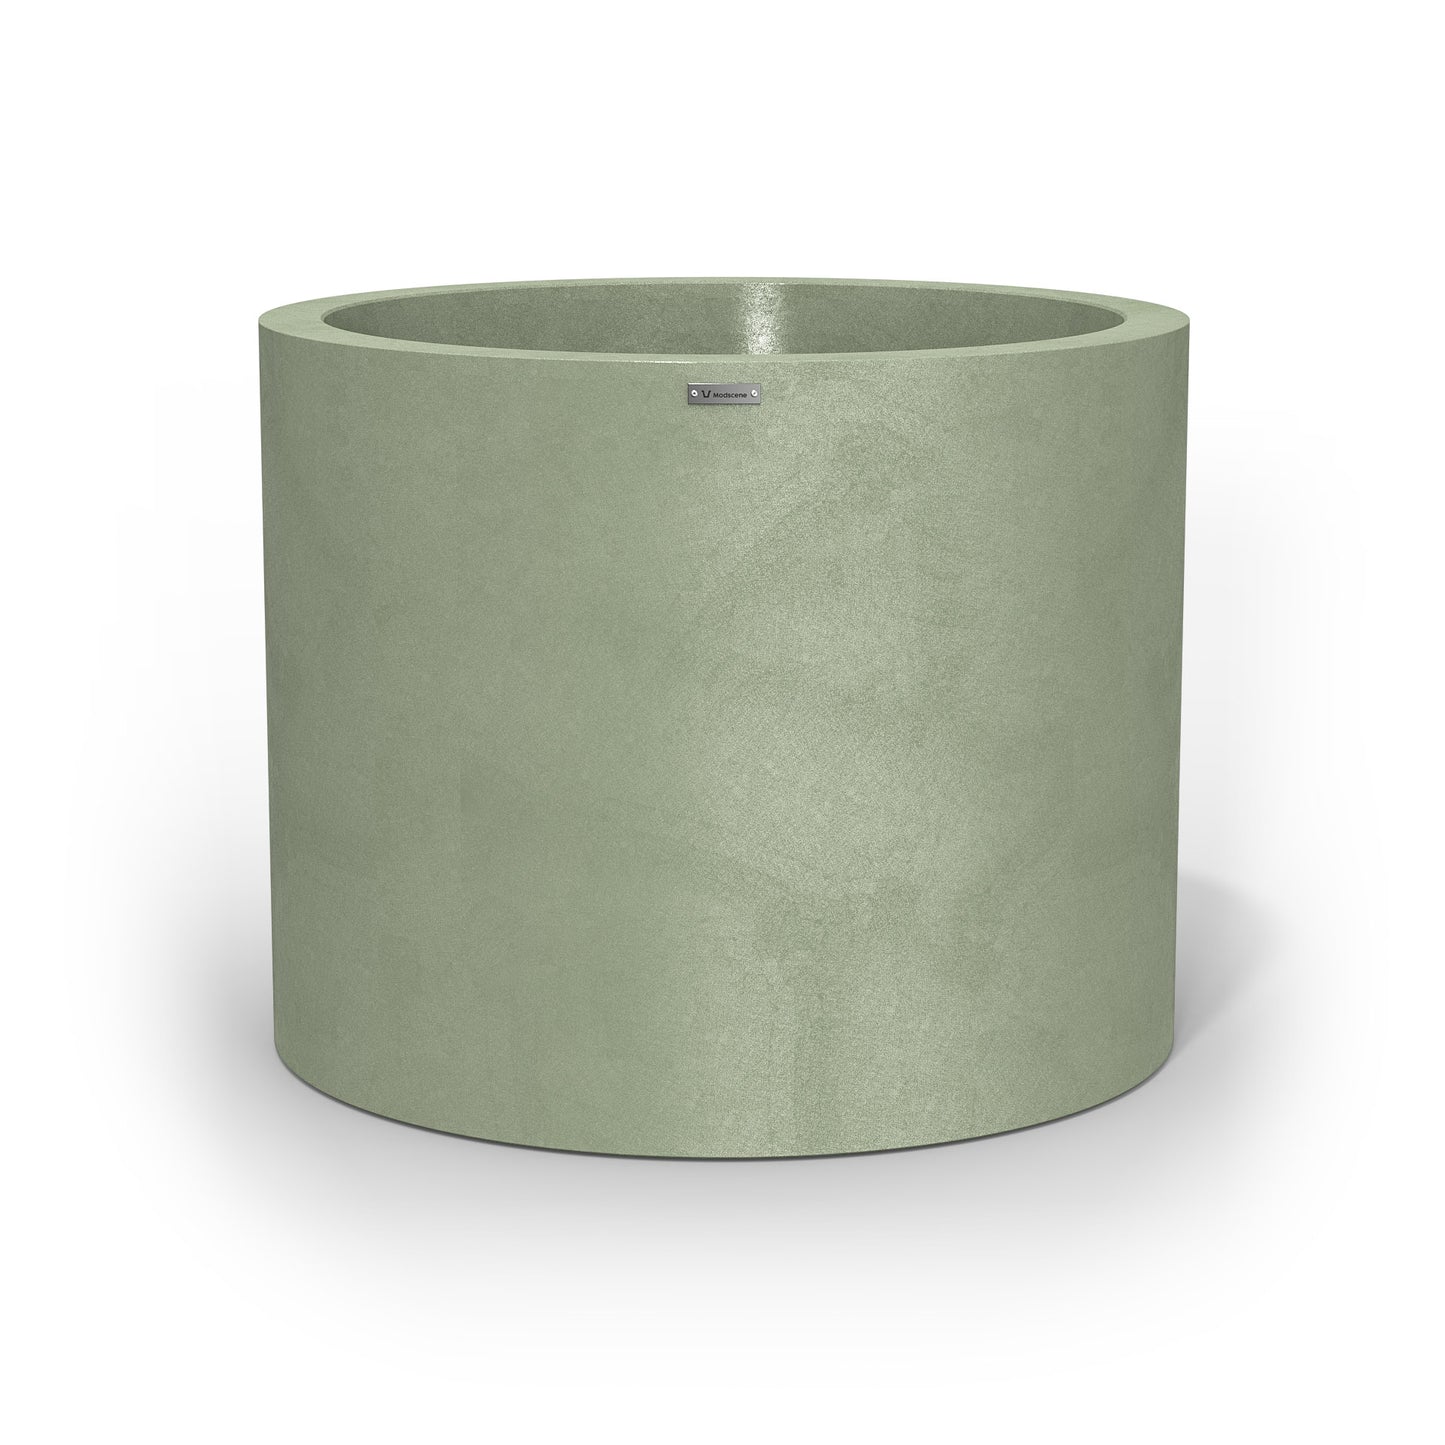 A giant cylinder pot planter in a pastel green colour with a concrete look finish.